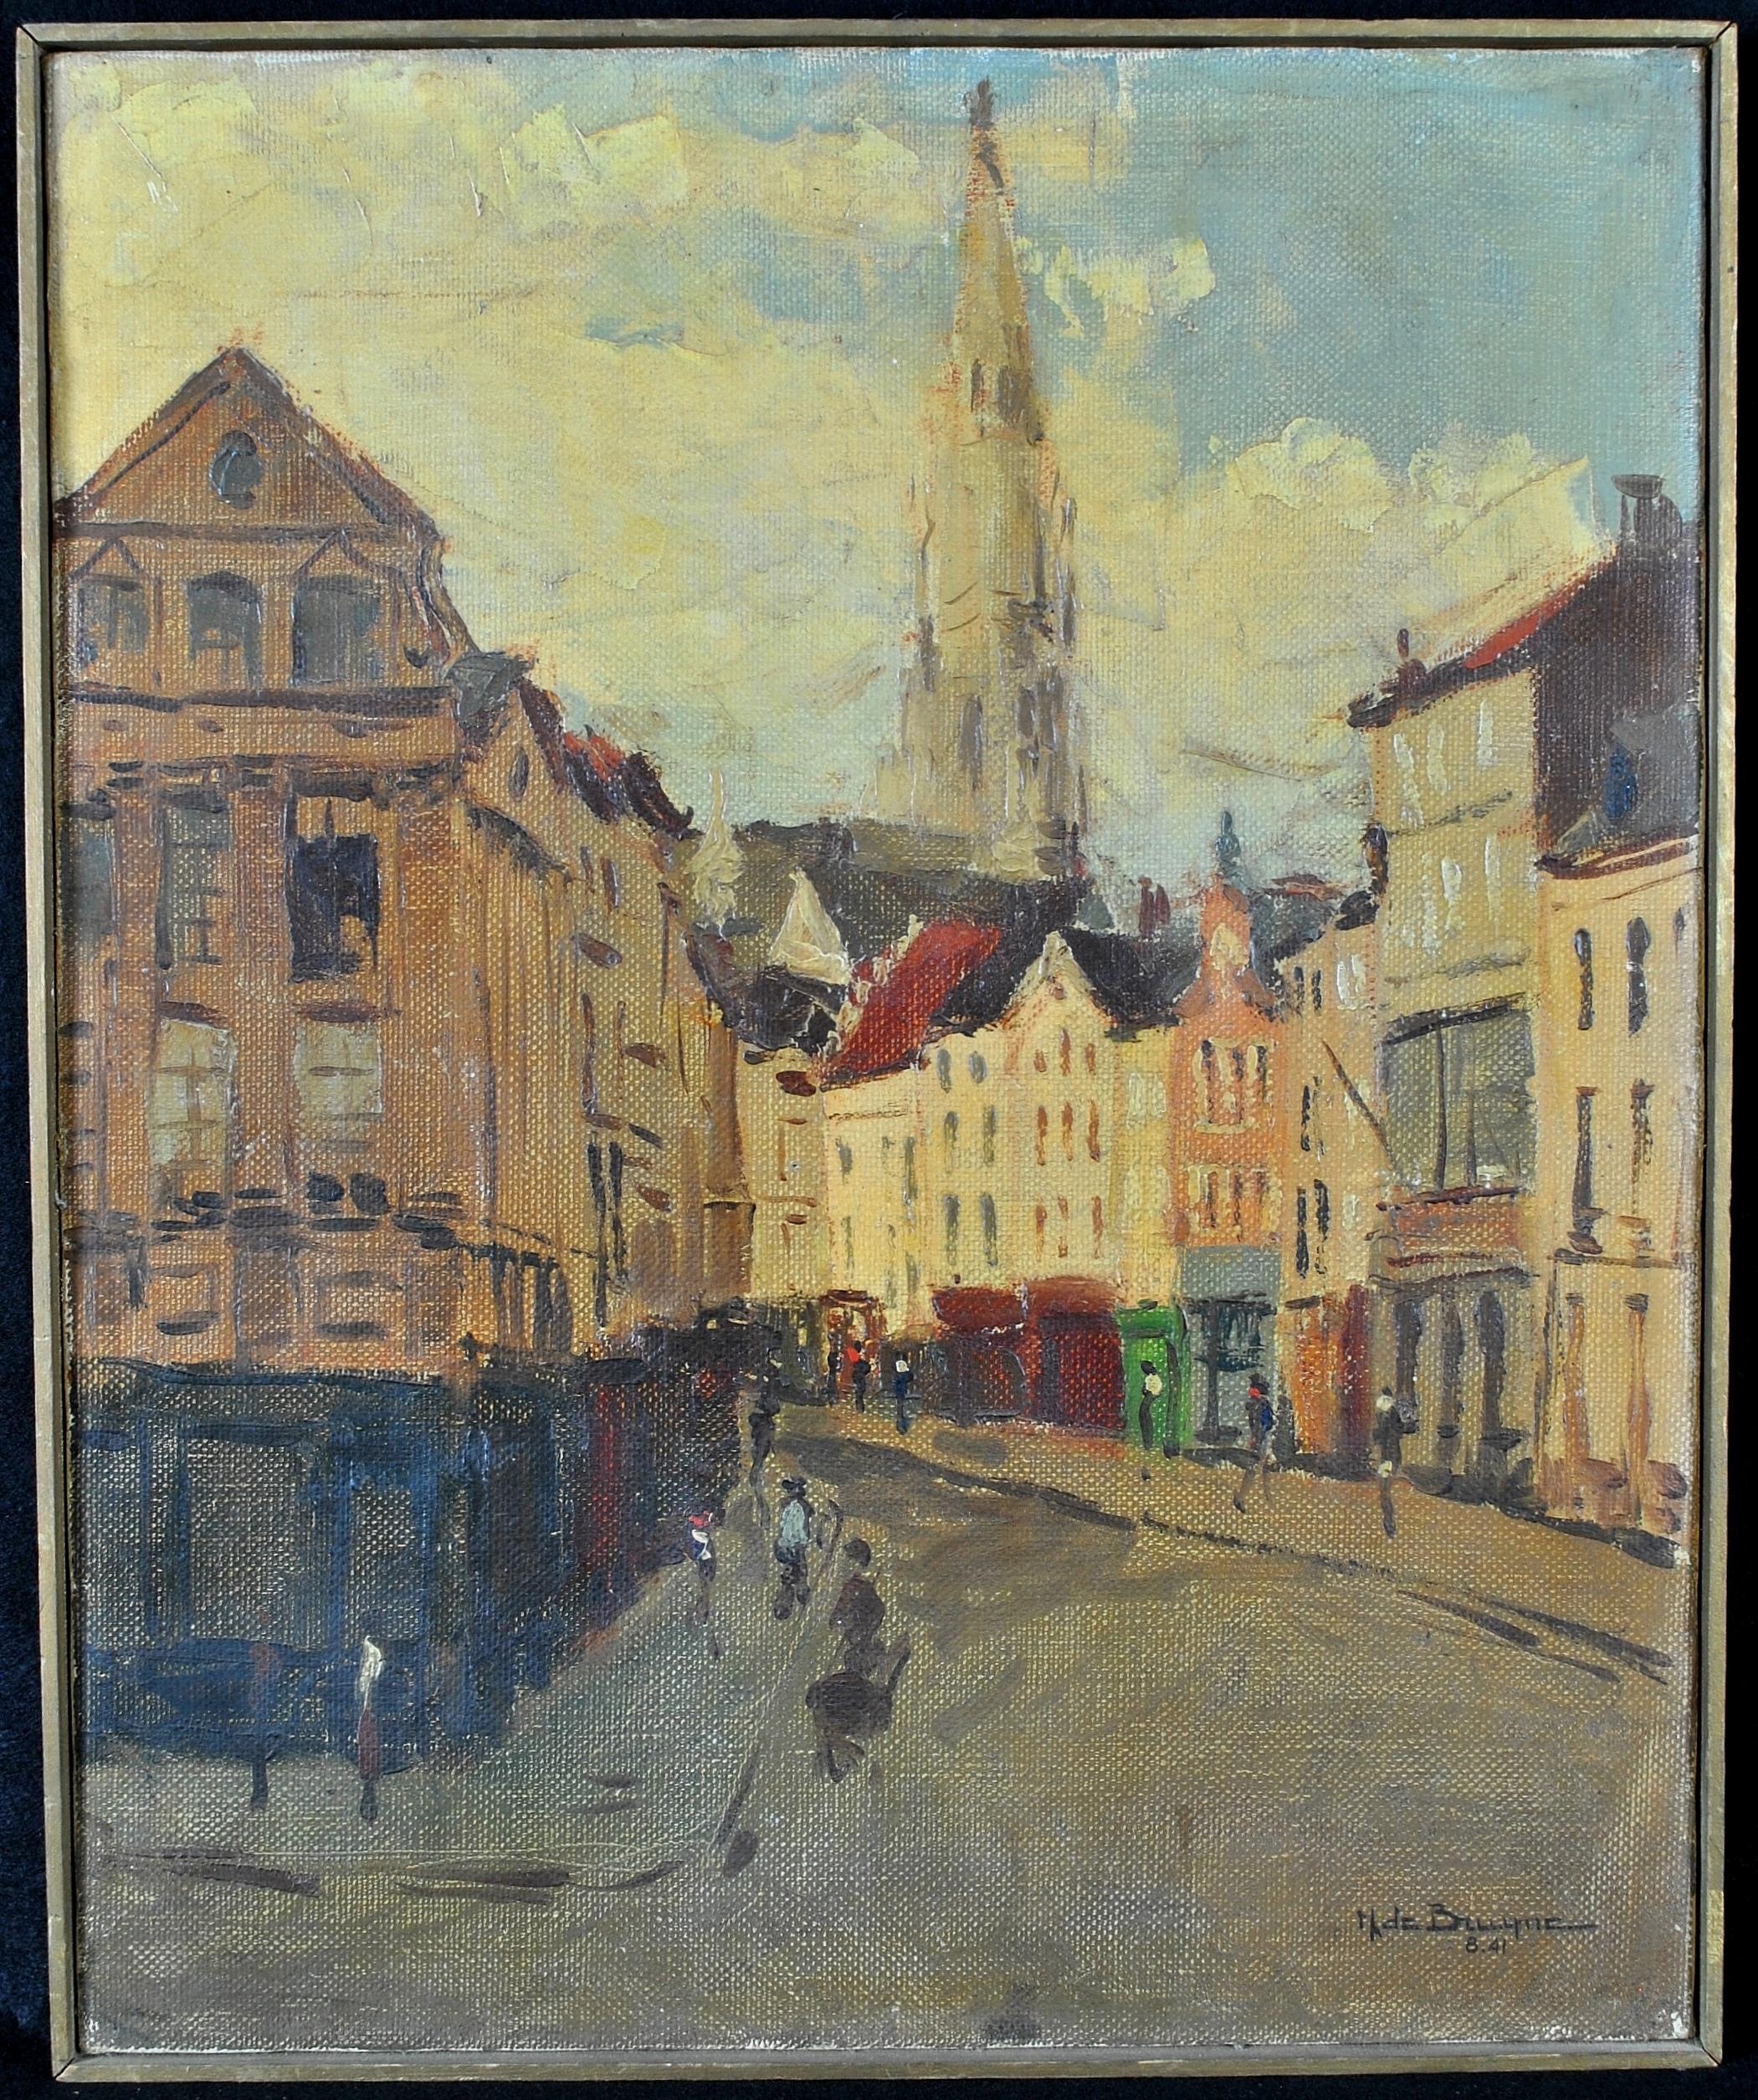 Unknown Landscape Painting - City Street View - Mid 20th Century Belgian Impressionist Oil on Canvas Painting